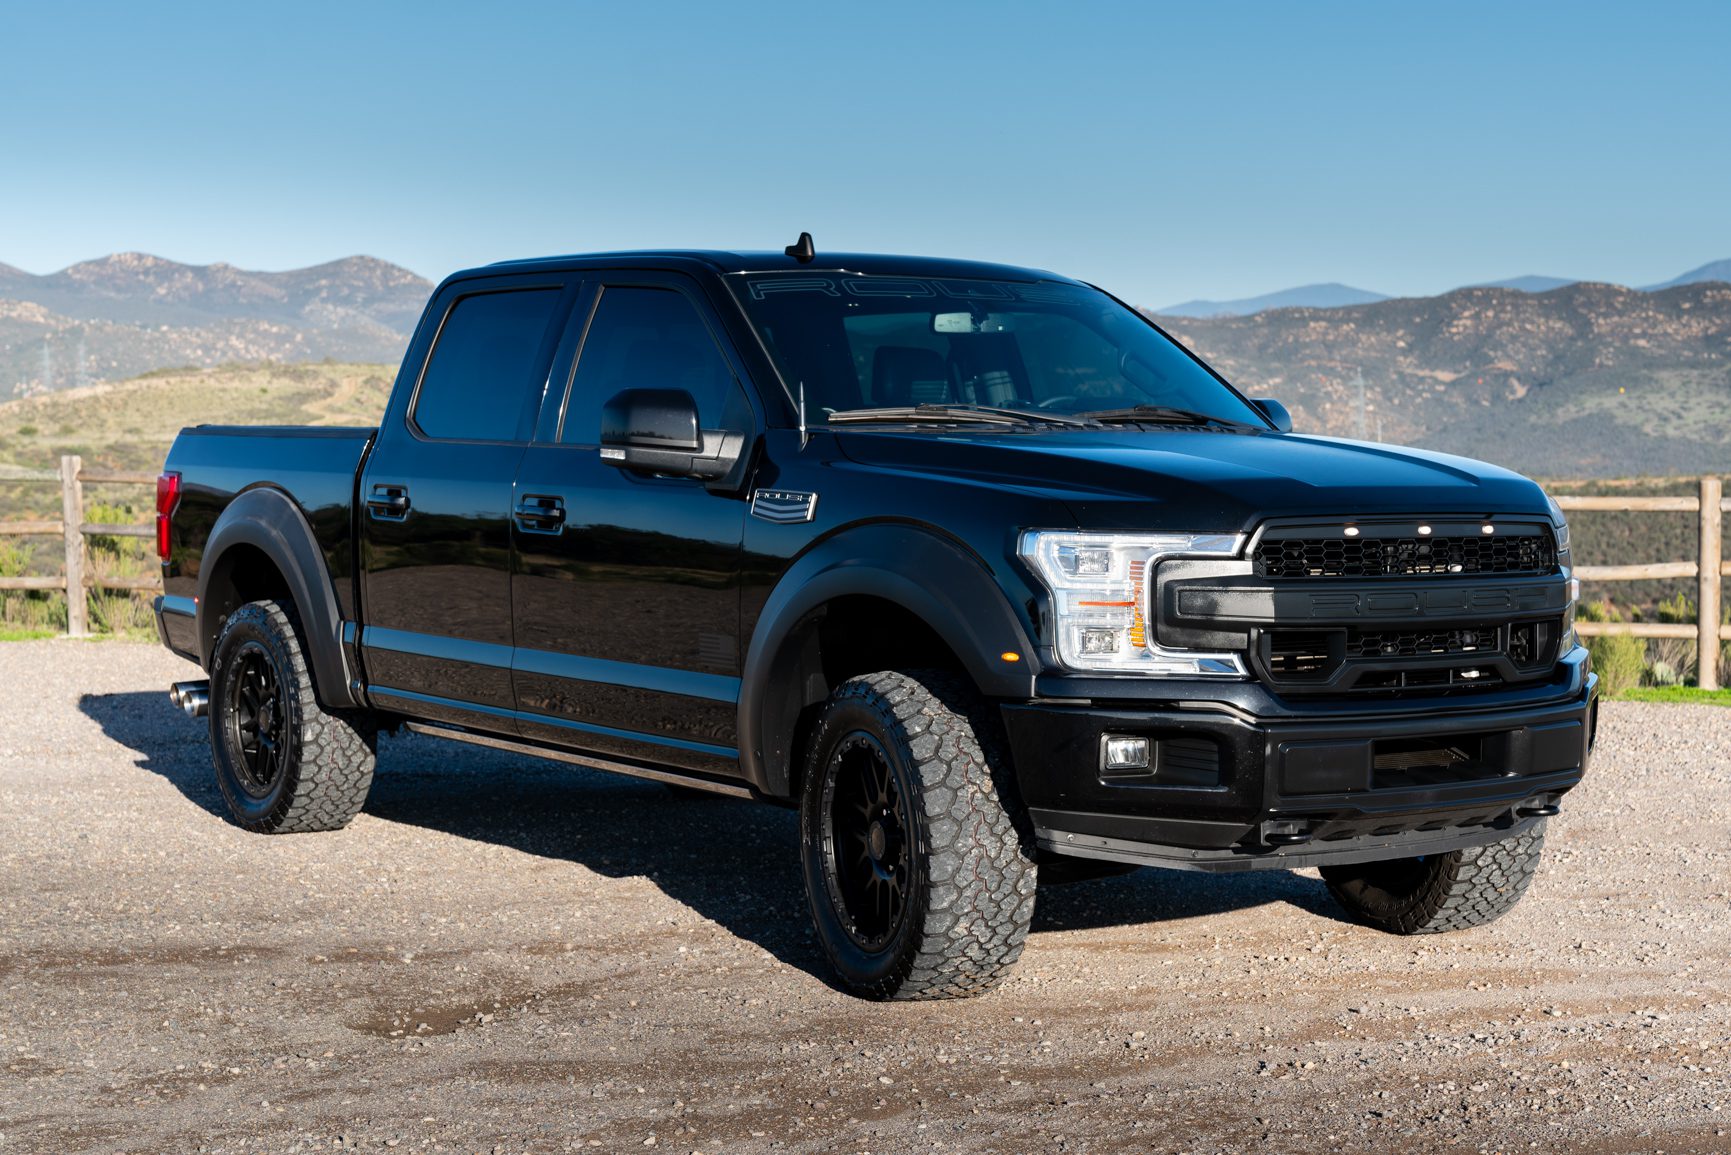 2020 ROUSH F-150 5.11 TACTICAL EDITION*